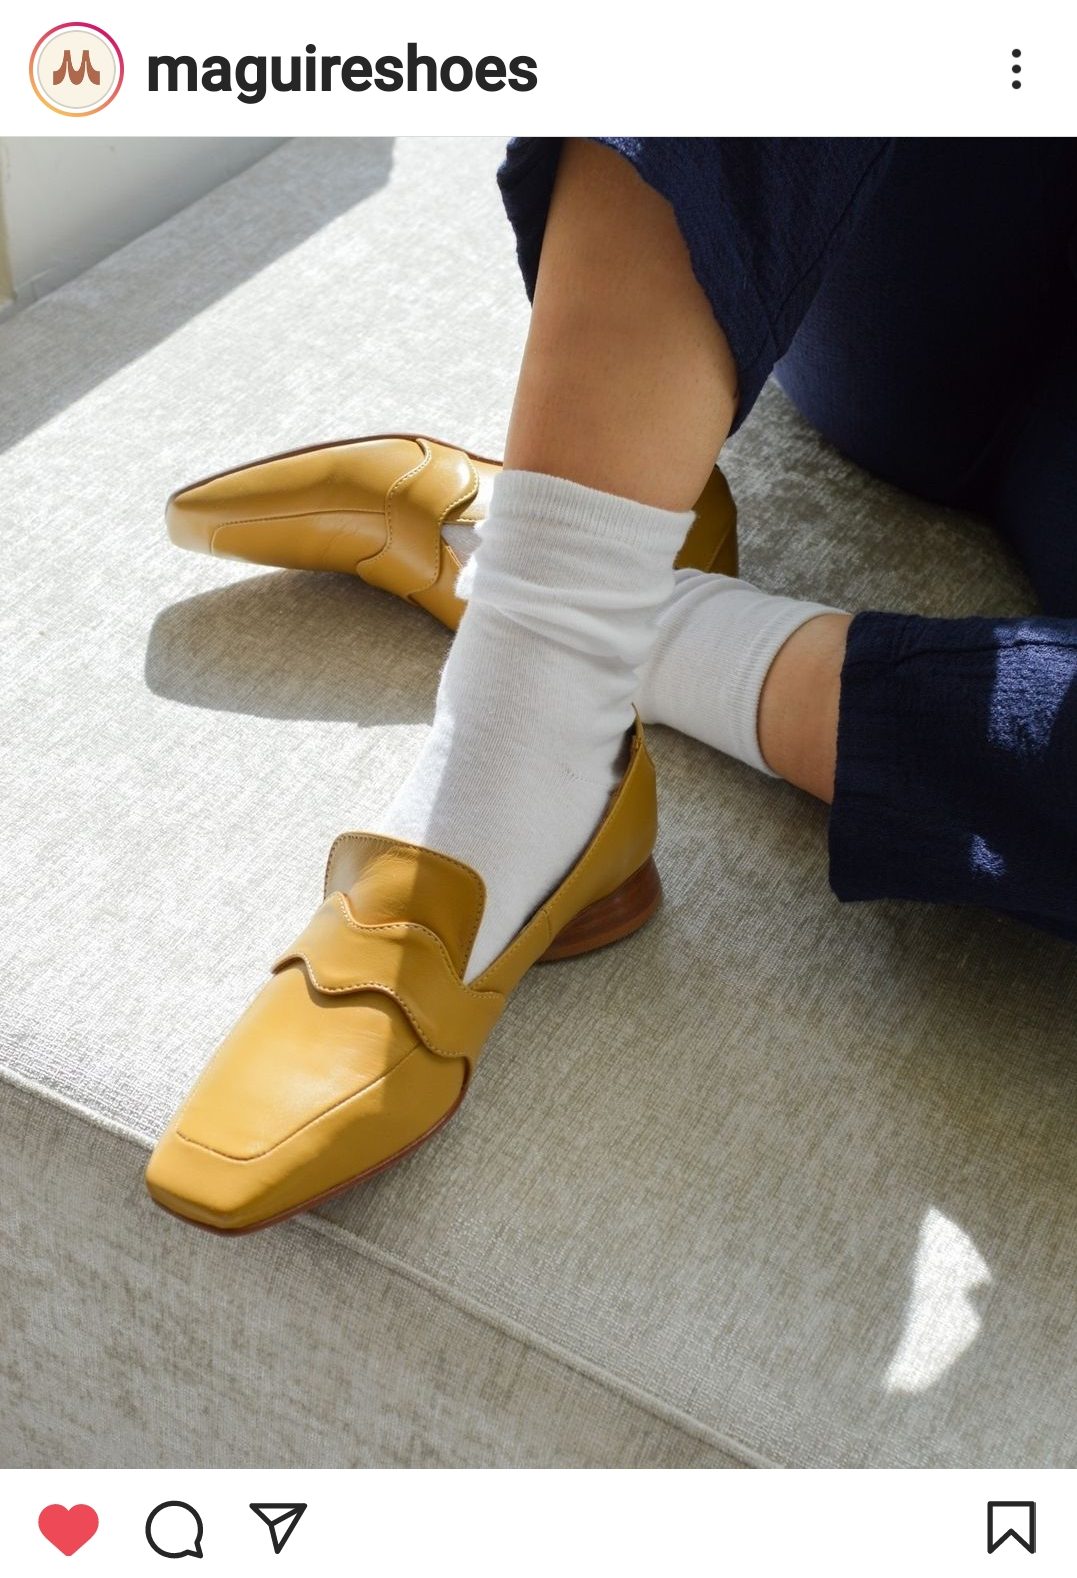 socks and sandals trend